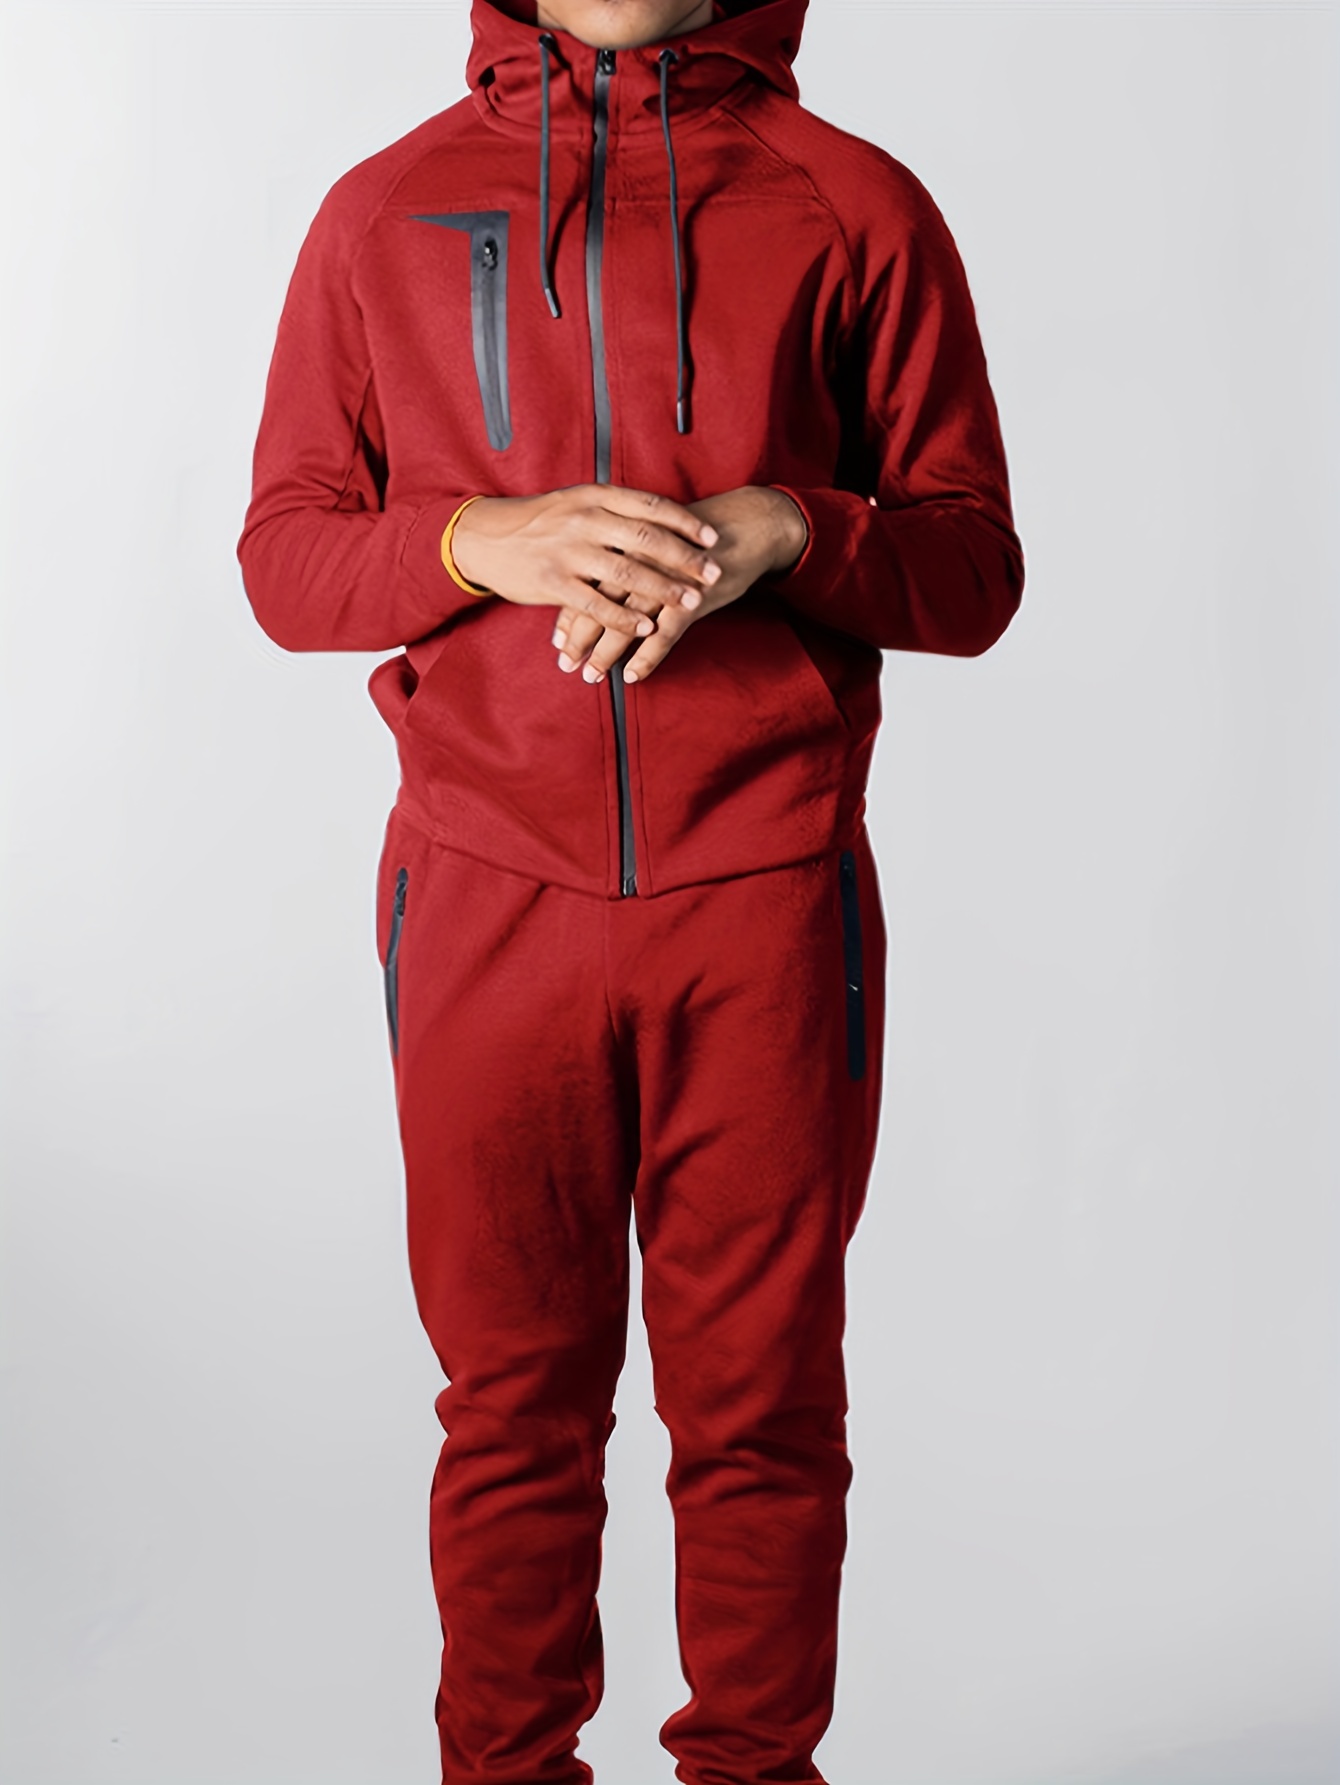 mens tracksuit mens 2 pieces zip up hooded athletic sweatshirt and sports pants for running fitness sport suit set